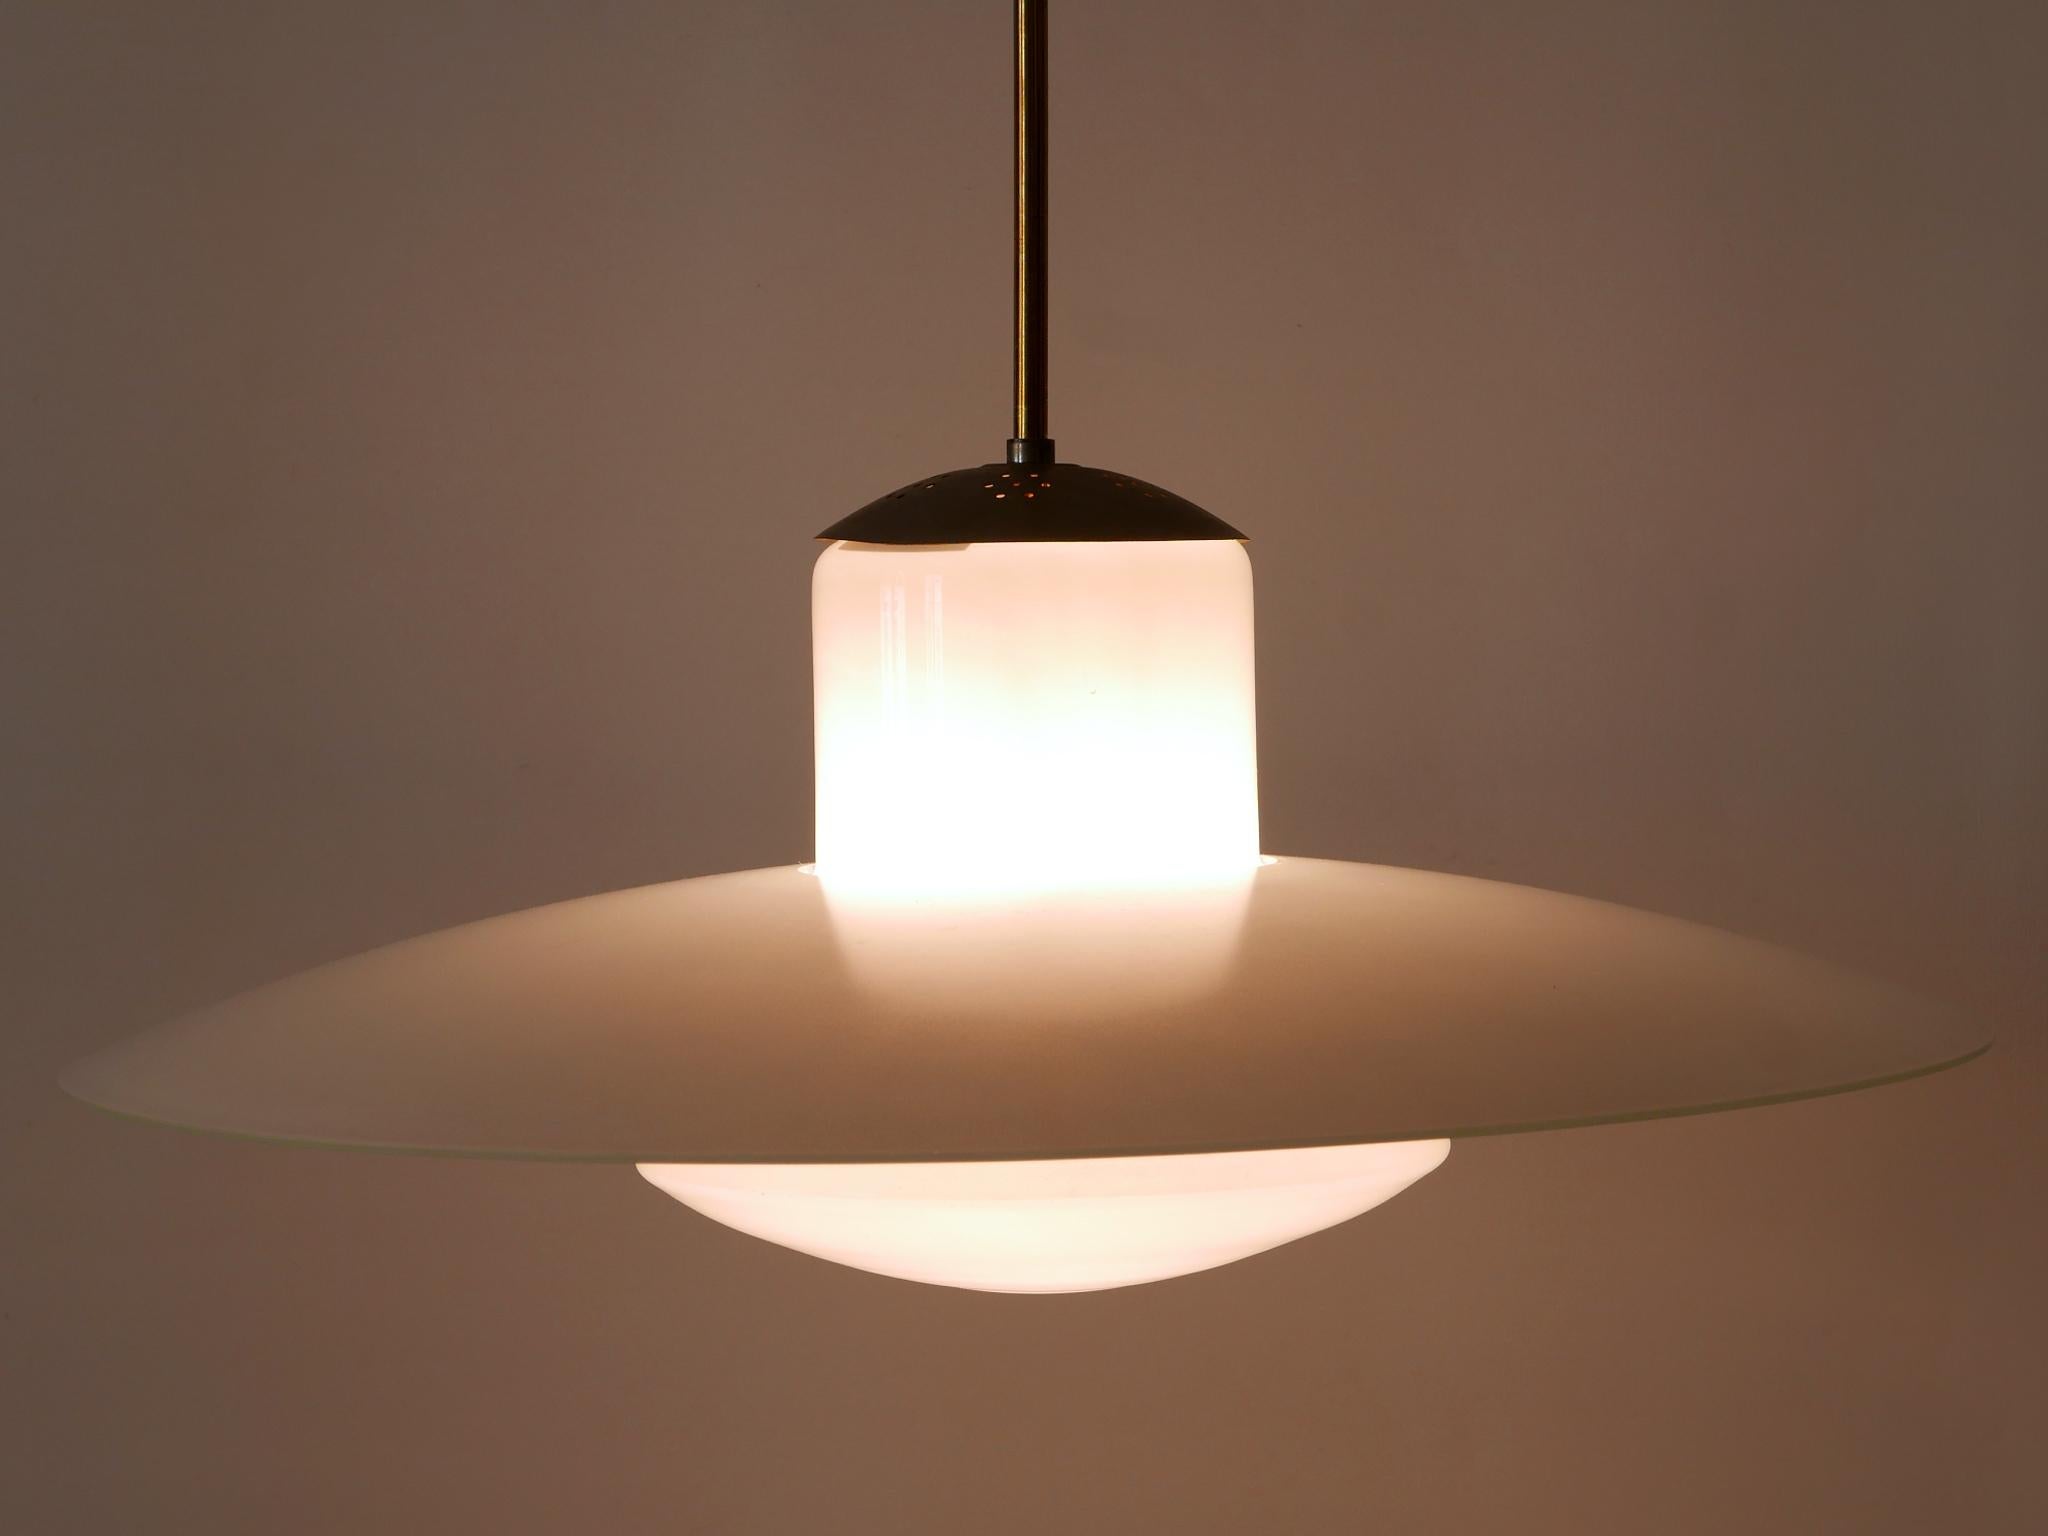 Rare Mid-Century Modern Pendant Lamp by Wolfgang Tümpel for Doria Germany 1950s For Sale 9